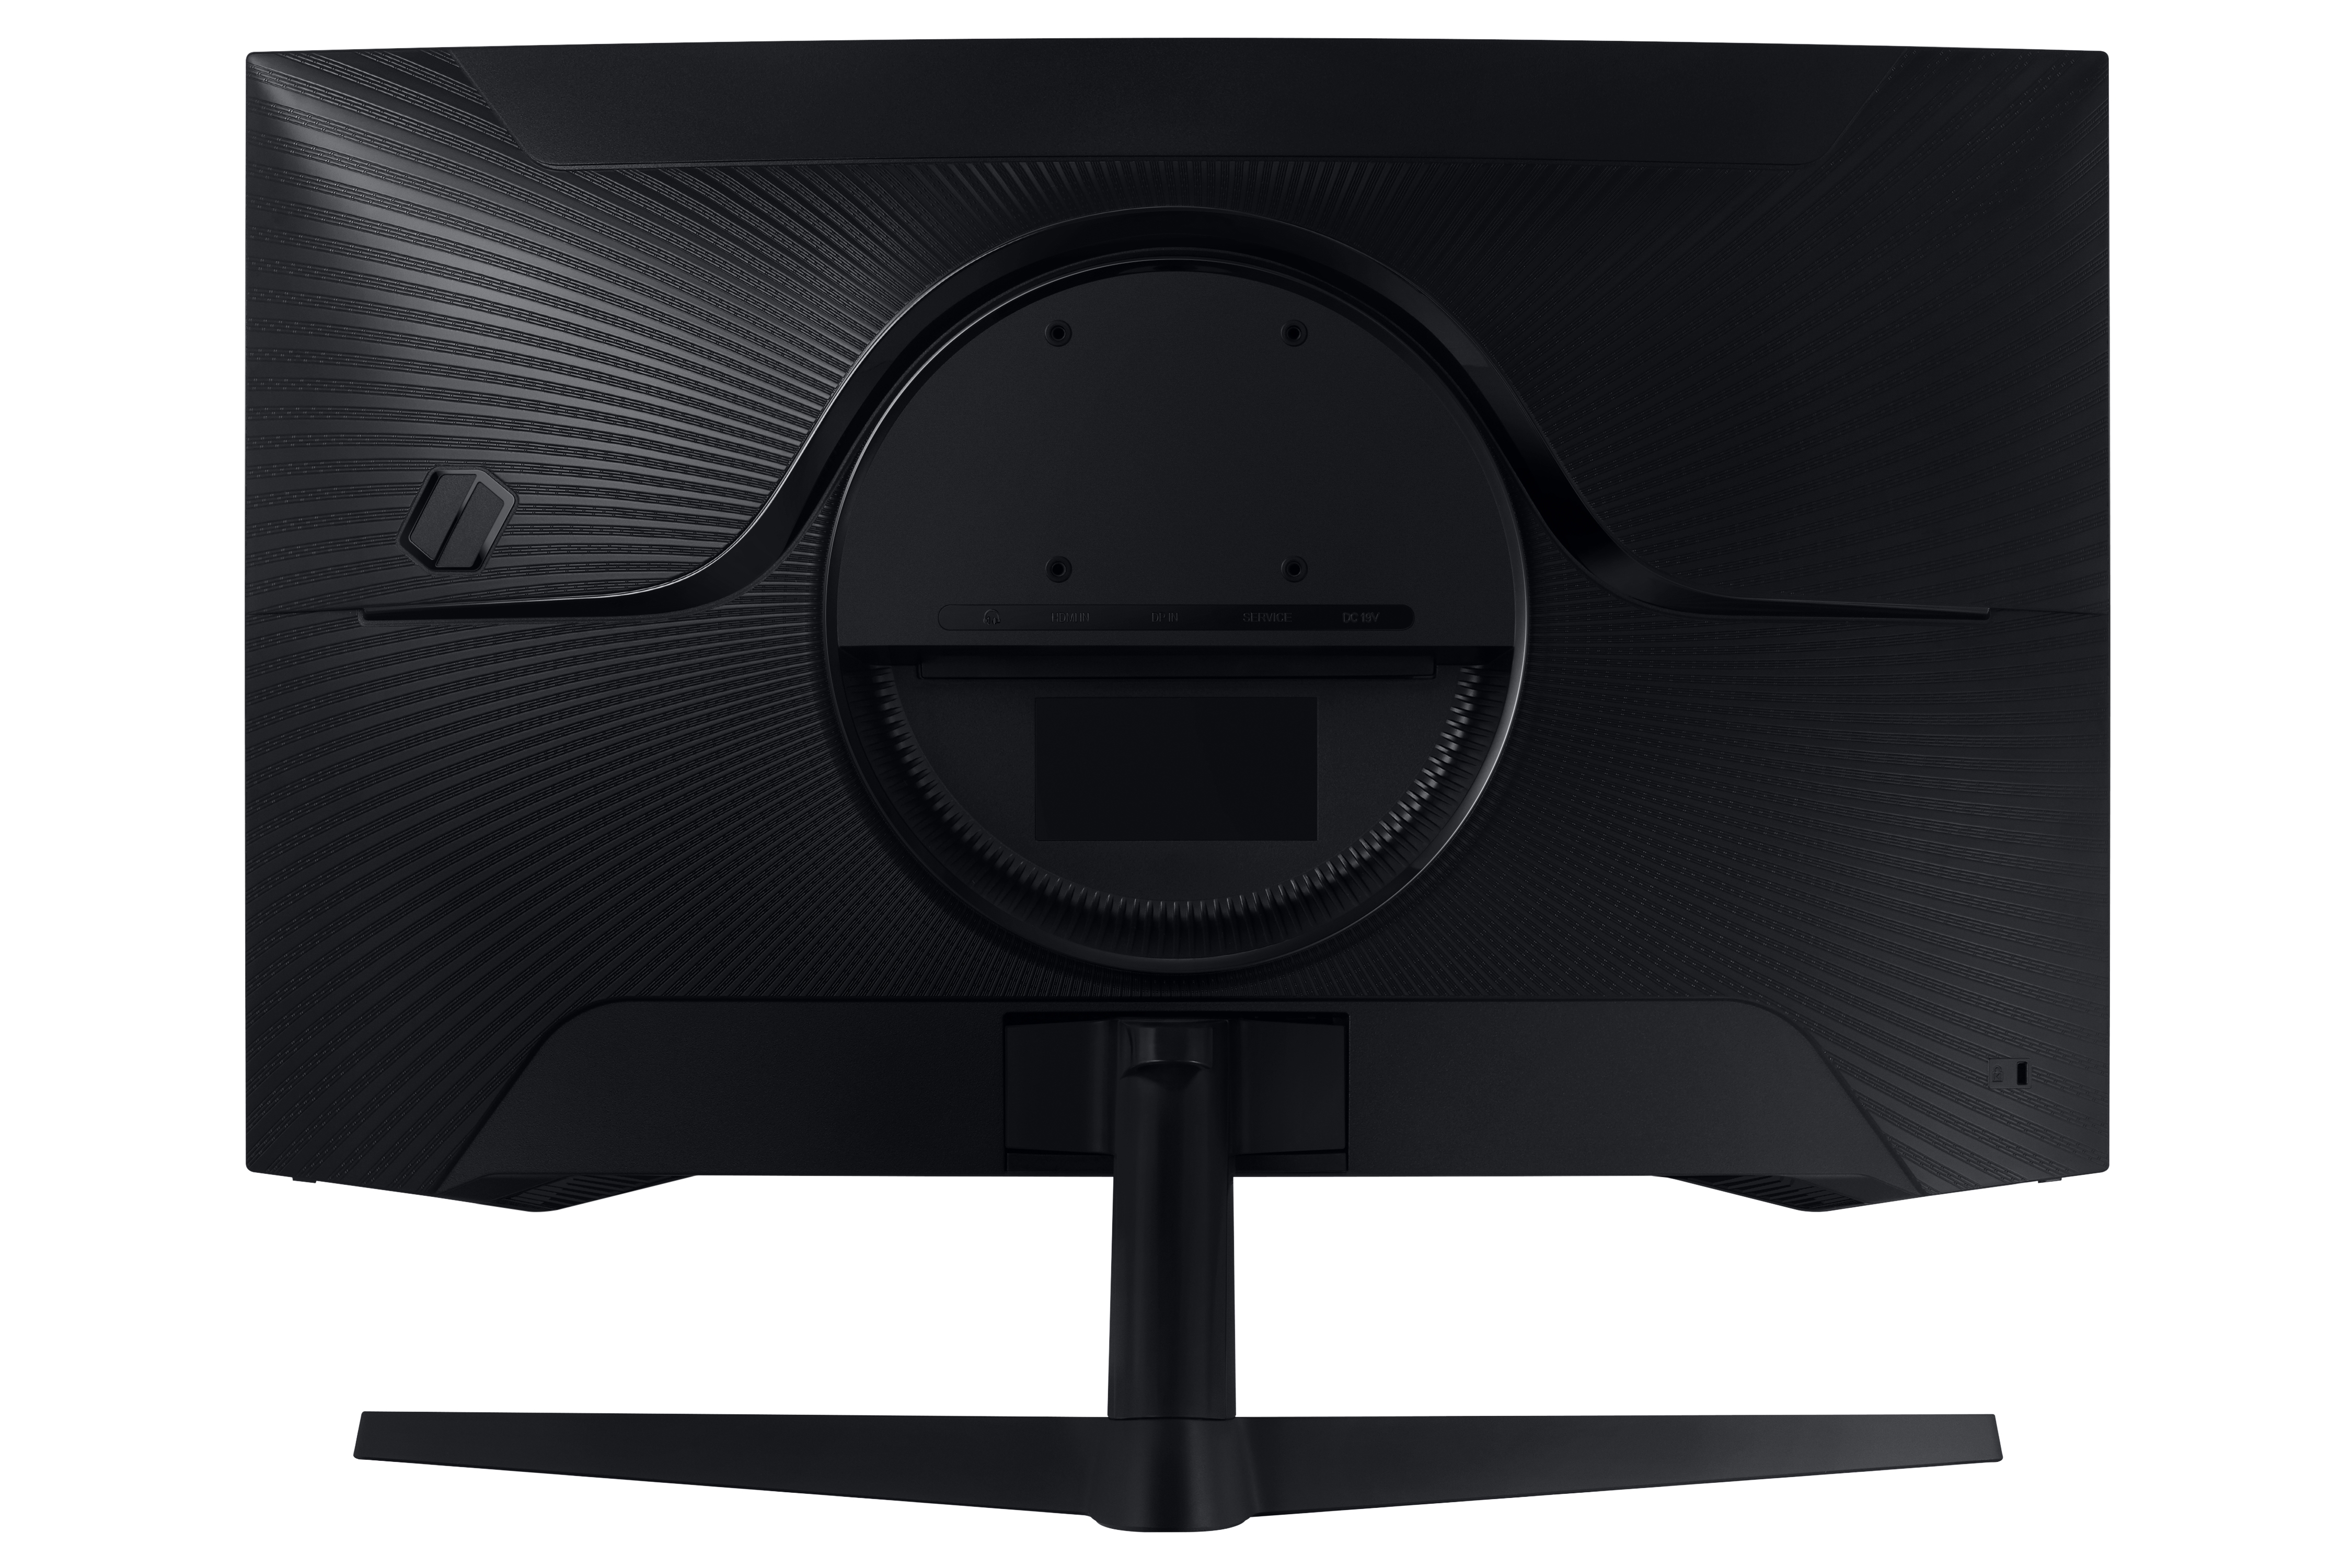 Ideal color settings for Samsung Odyssey G5 27 inch monitor 